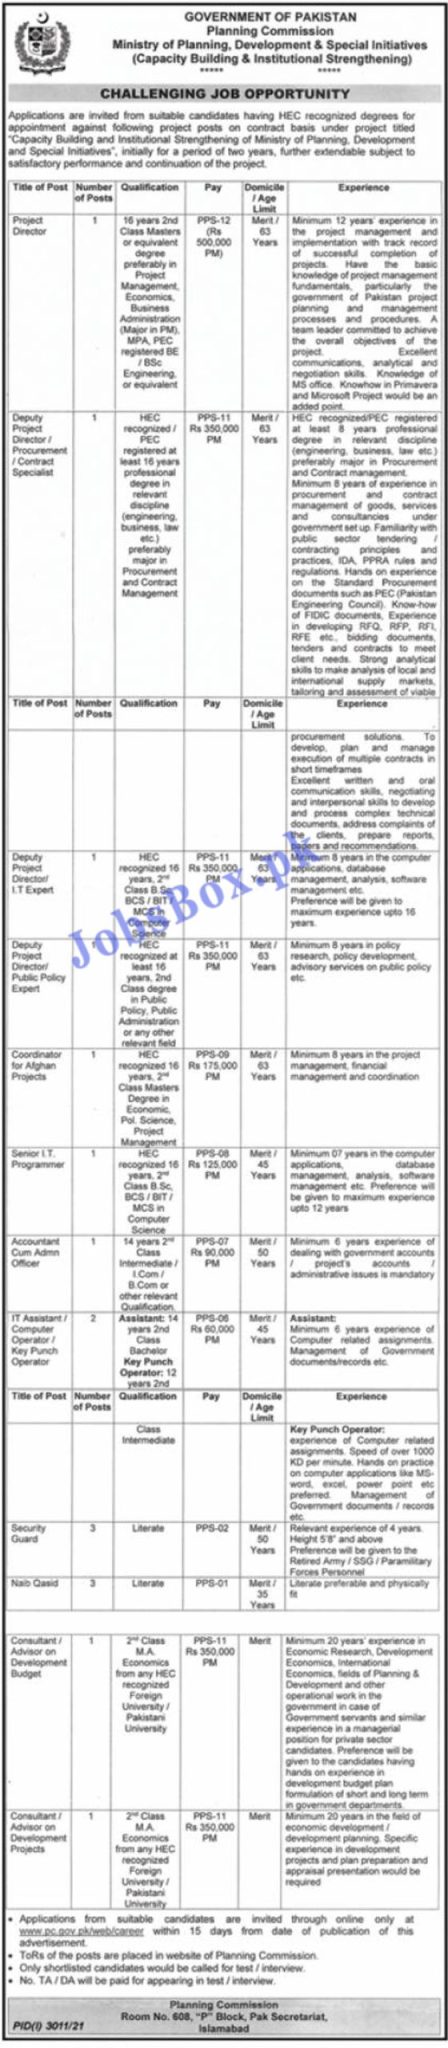 www.pc.gov.pk - Ministry of Planning and Development Jobs 2021 in Pakistan